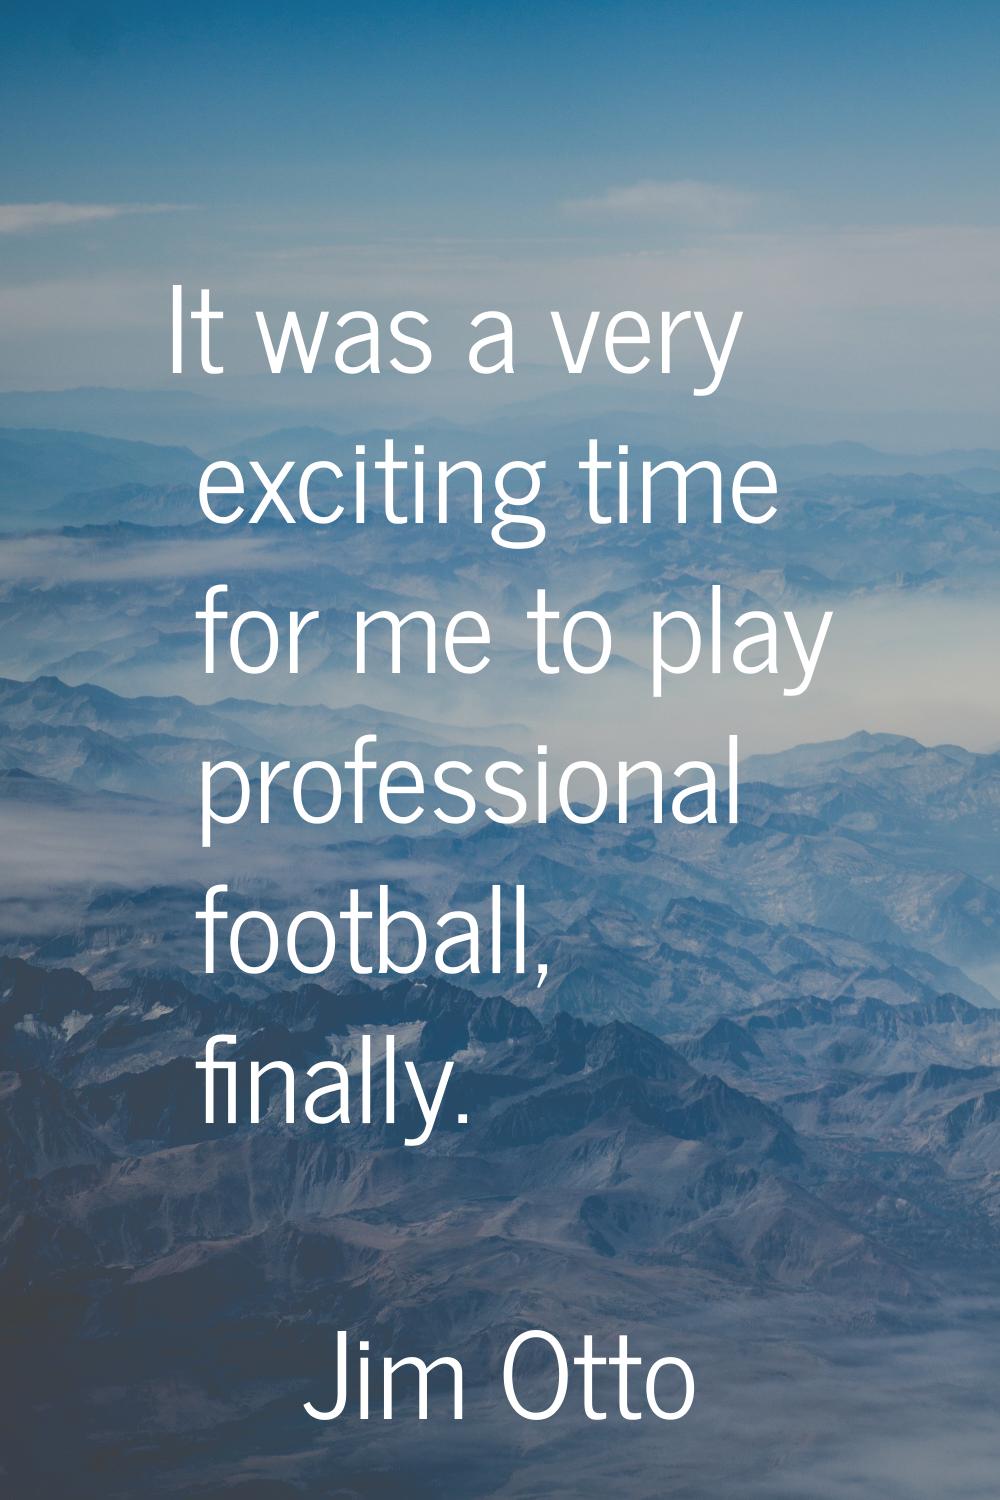 It was a very exciting time for me to play professional football, finally.